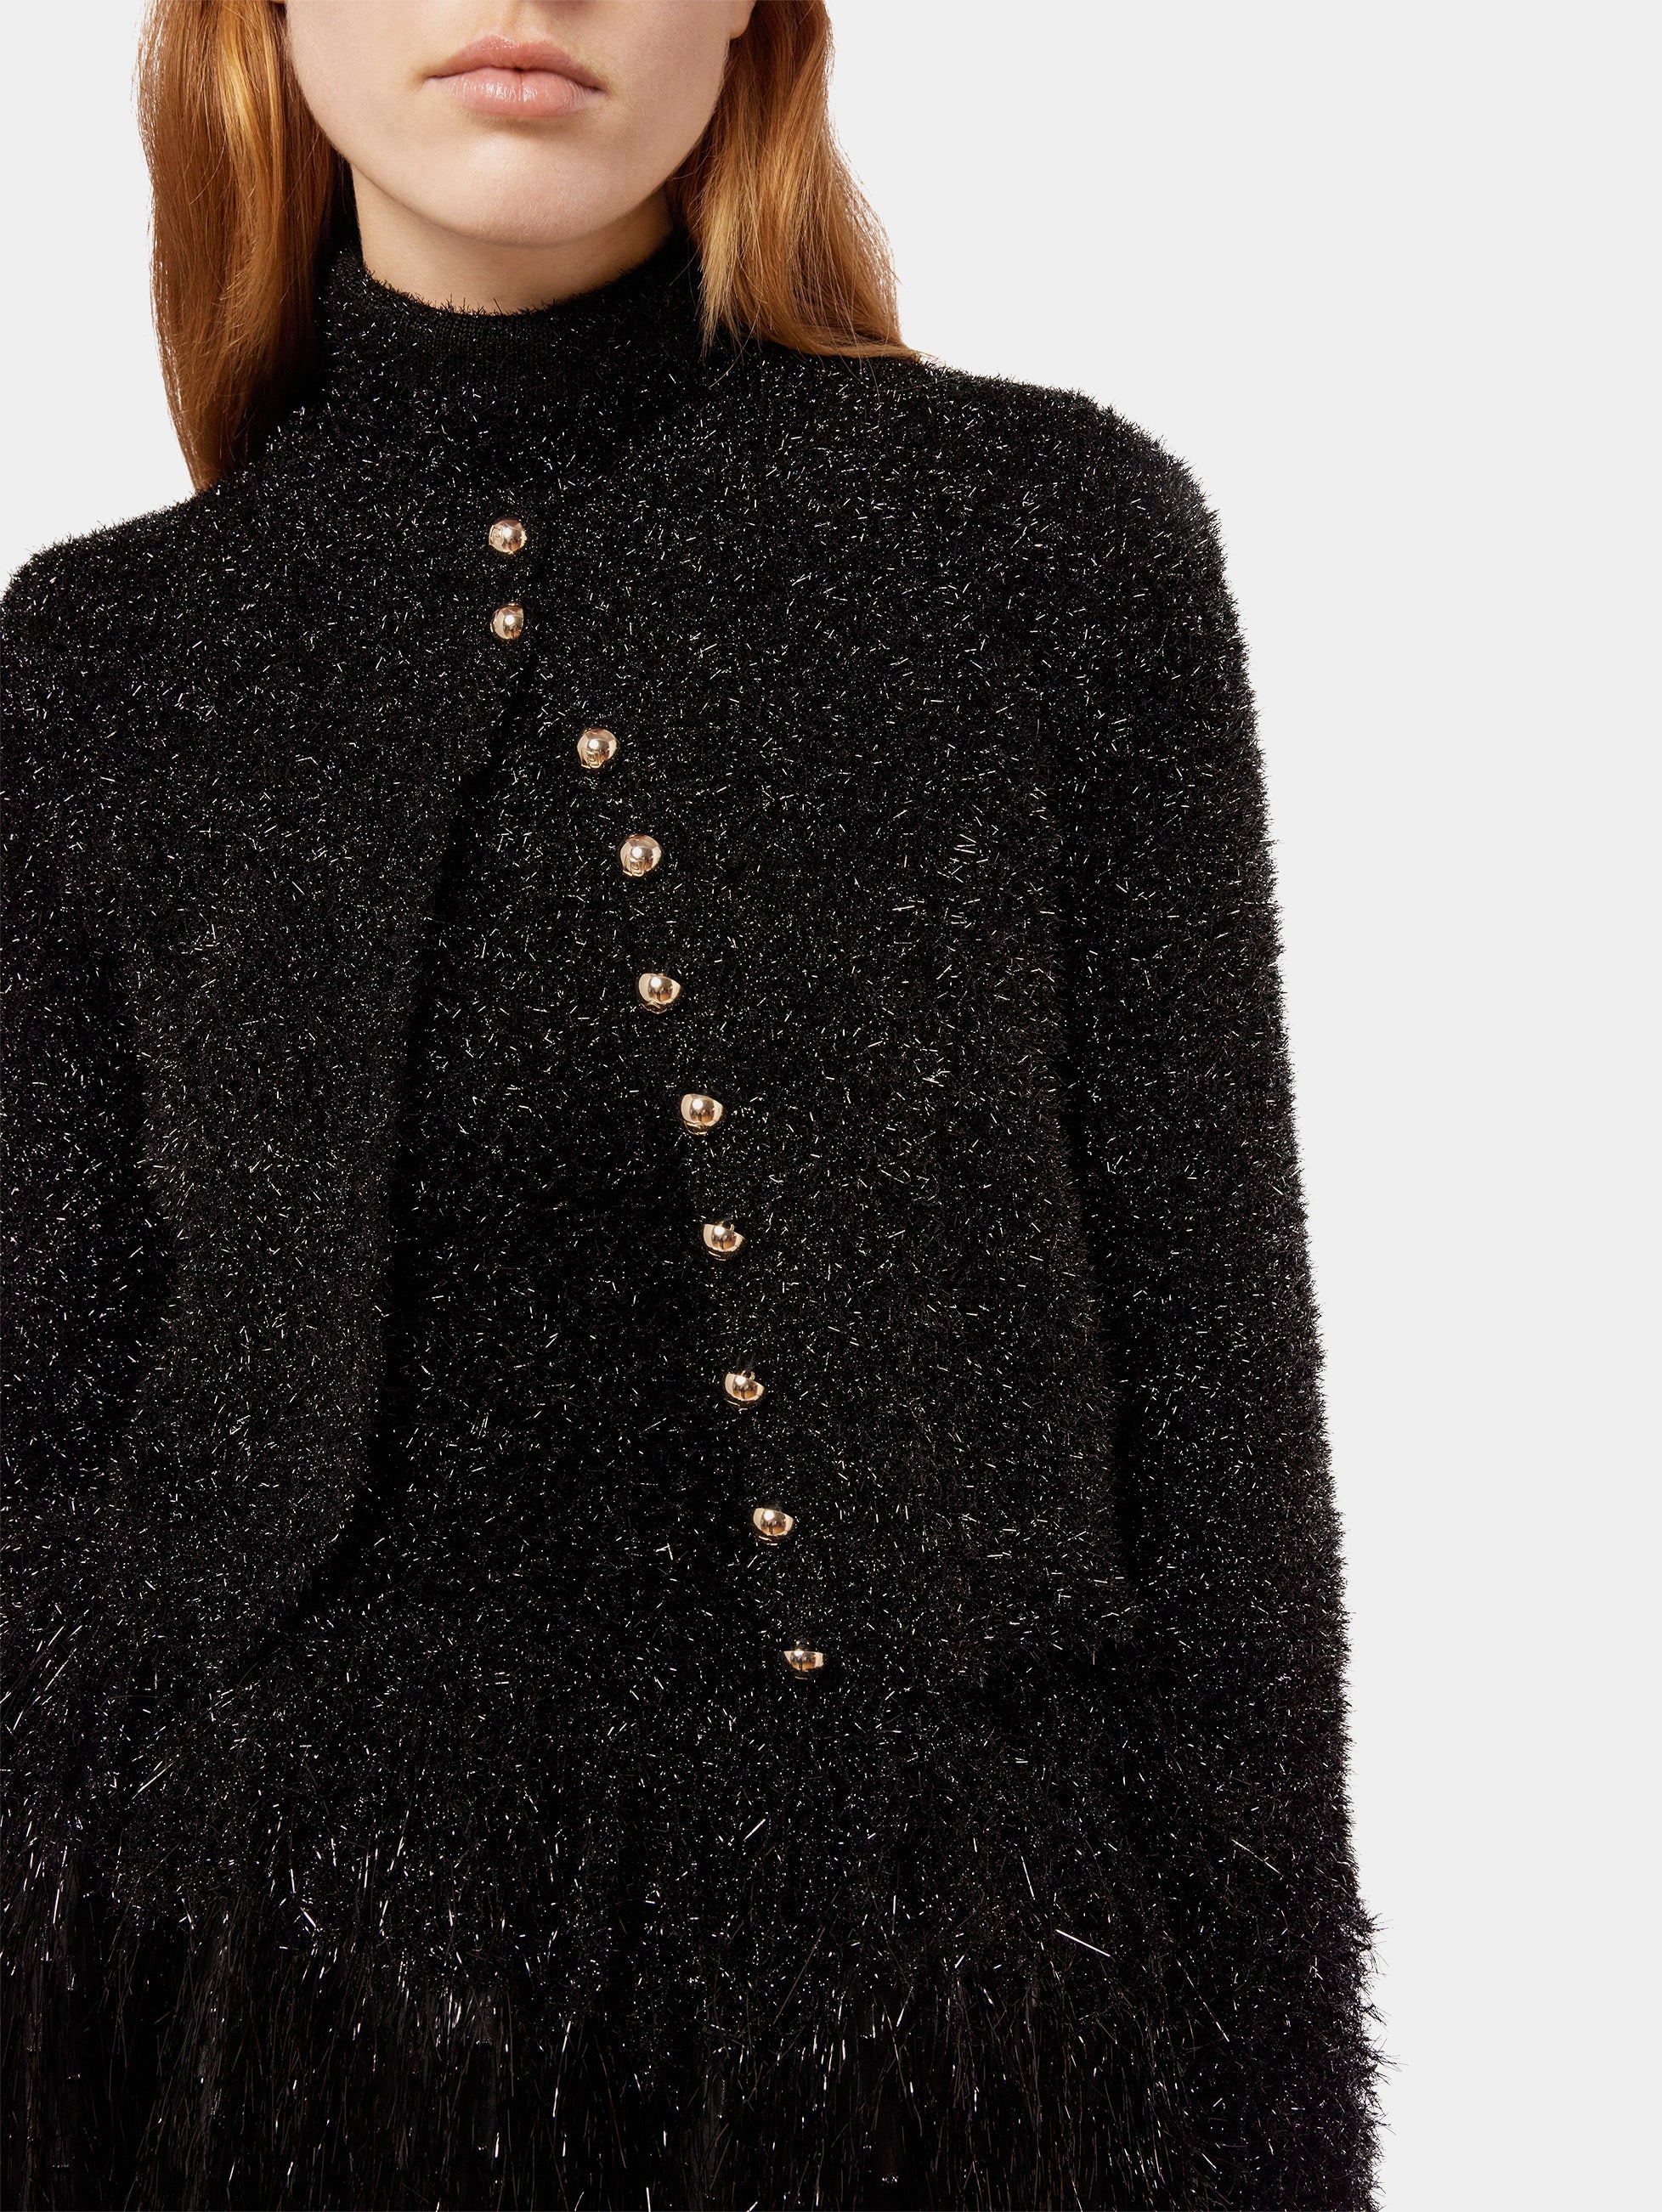 CROPPED BLACK CARDIGAN WITH GOLD BUTTONS - 3